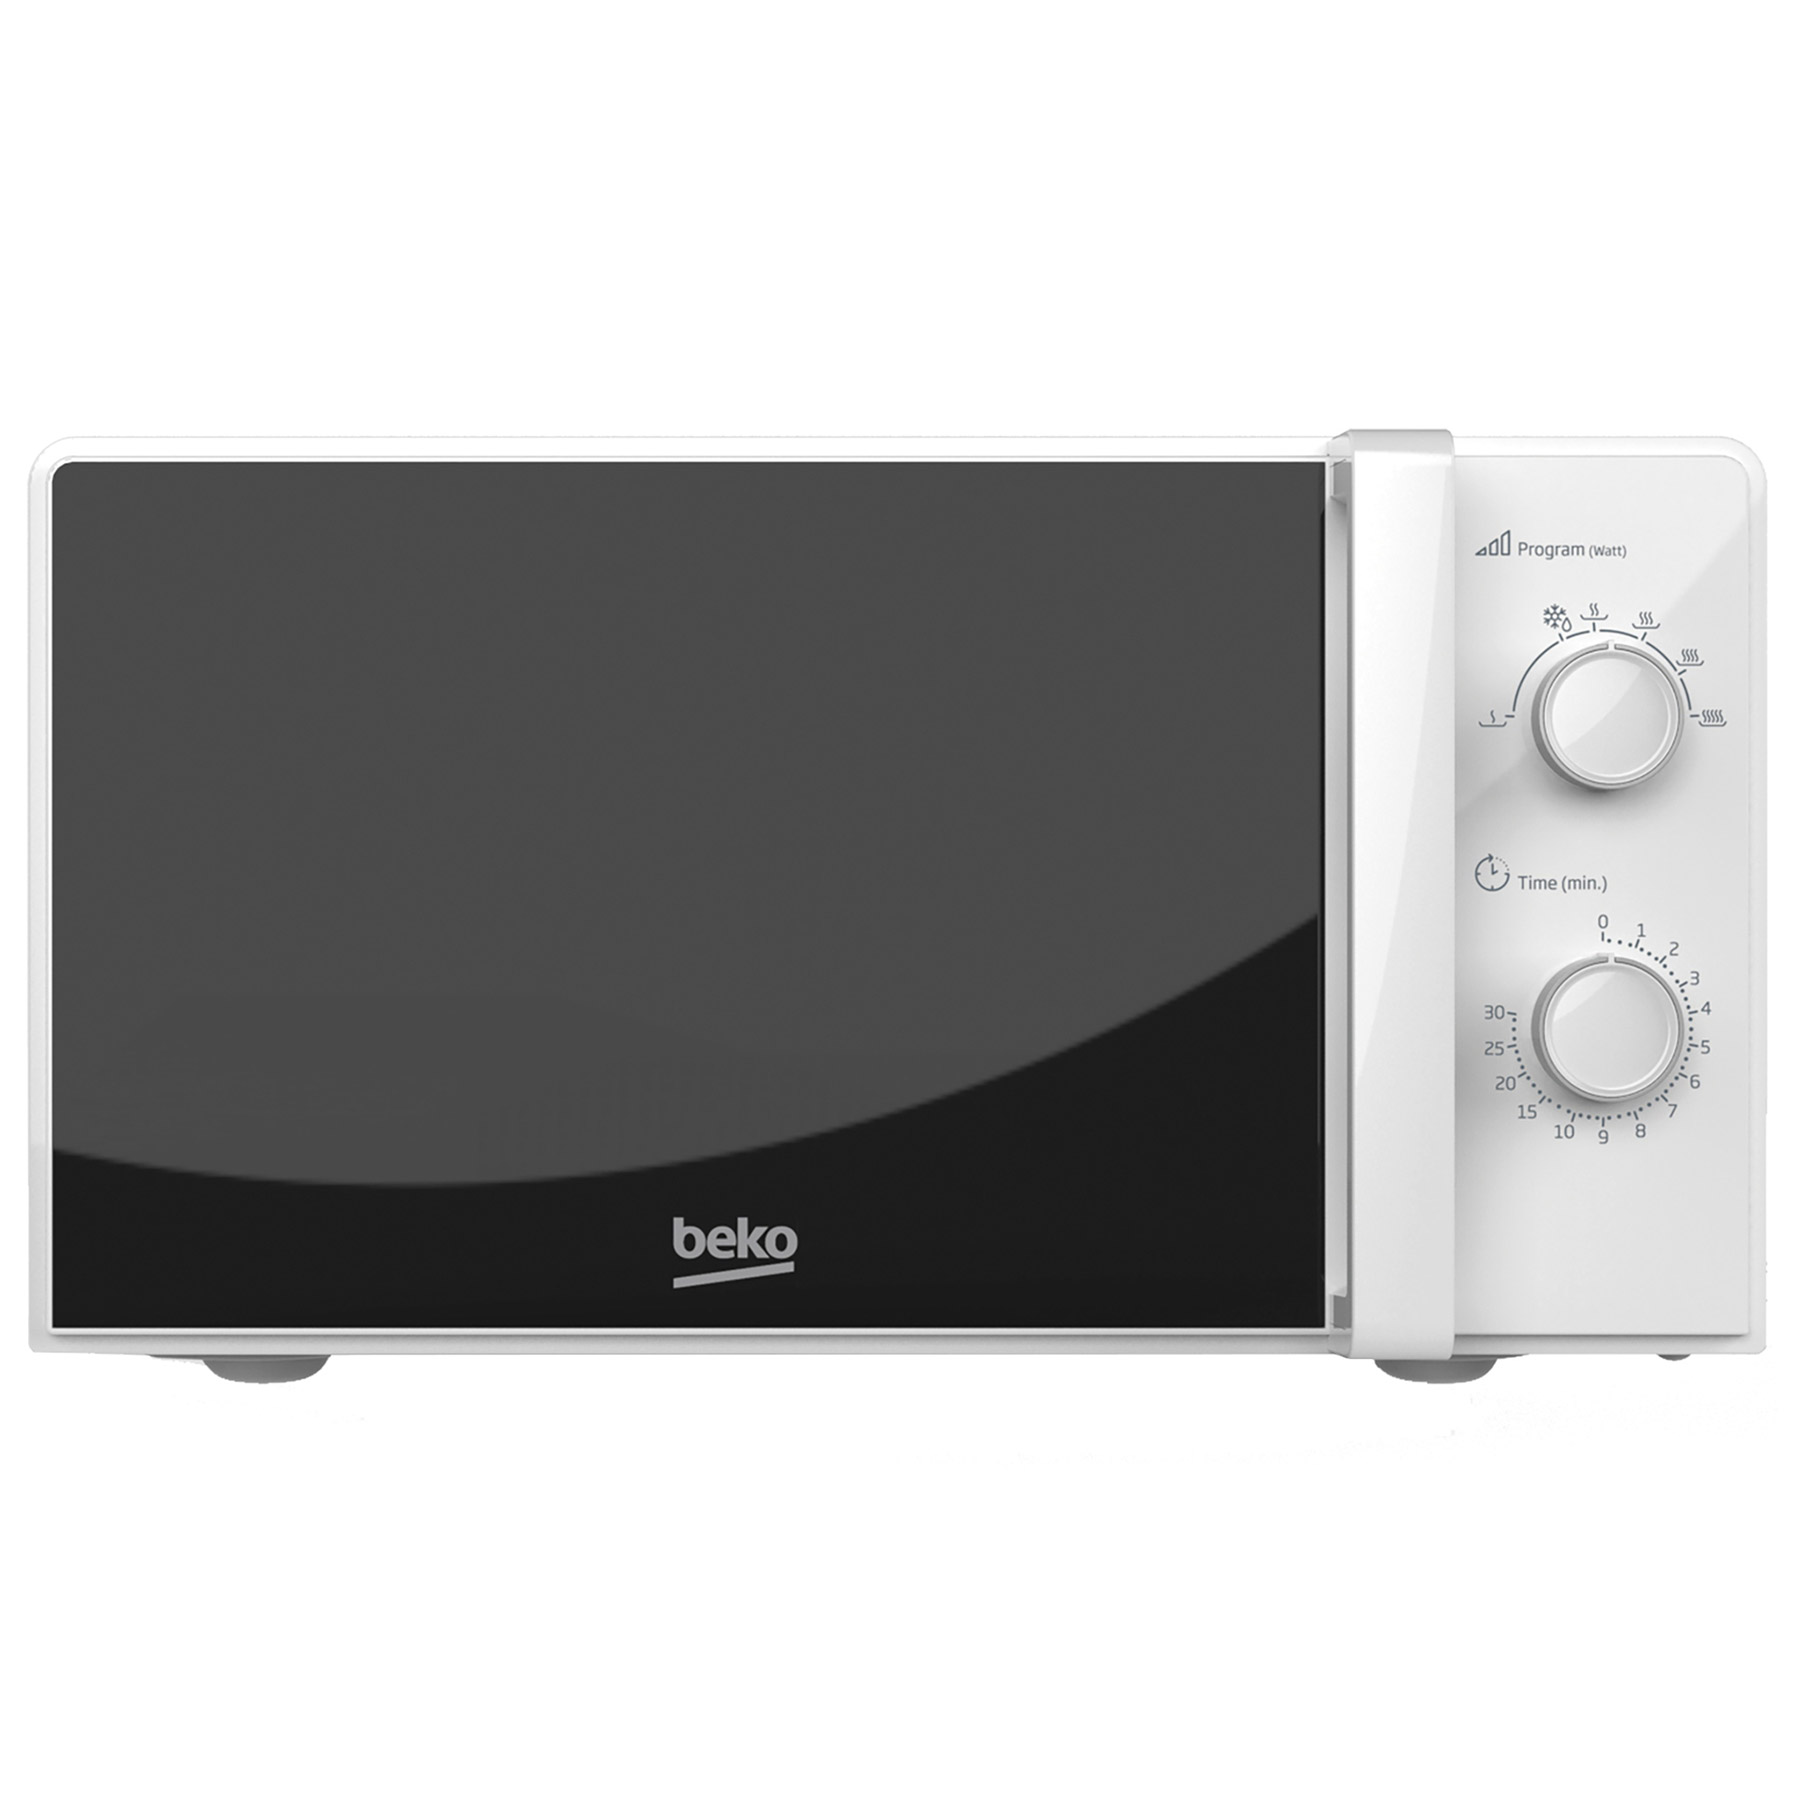 Image of Beko MOC20100WFB Microwave Oven in White 20L 700W Manual Control